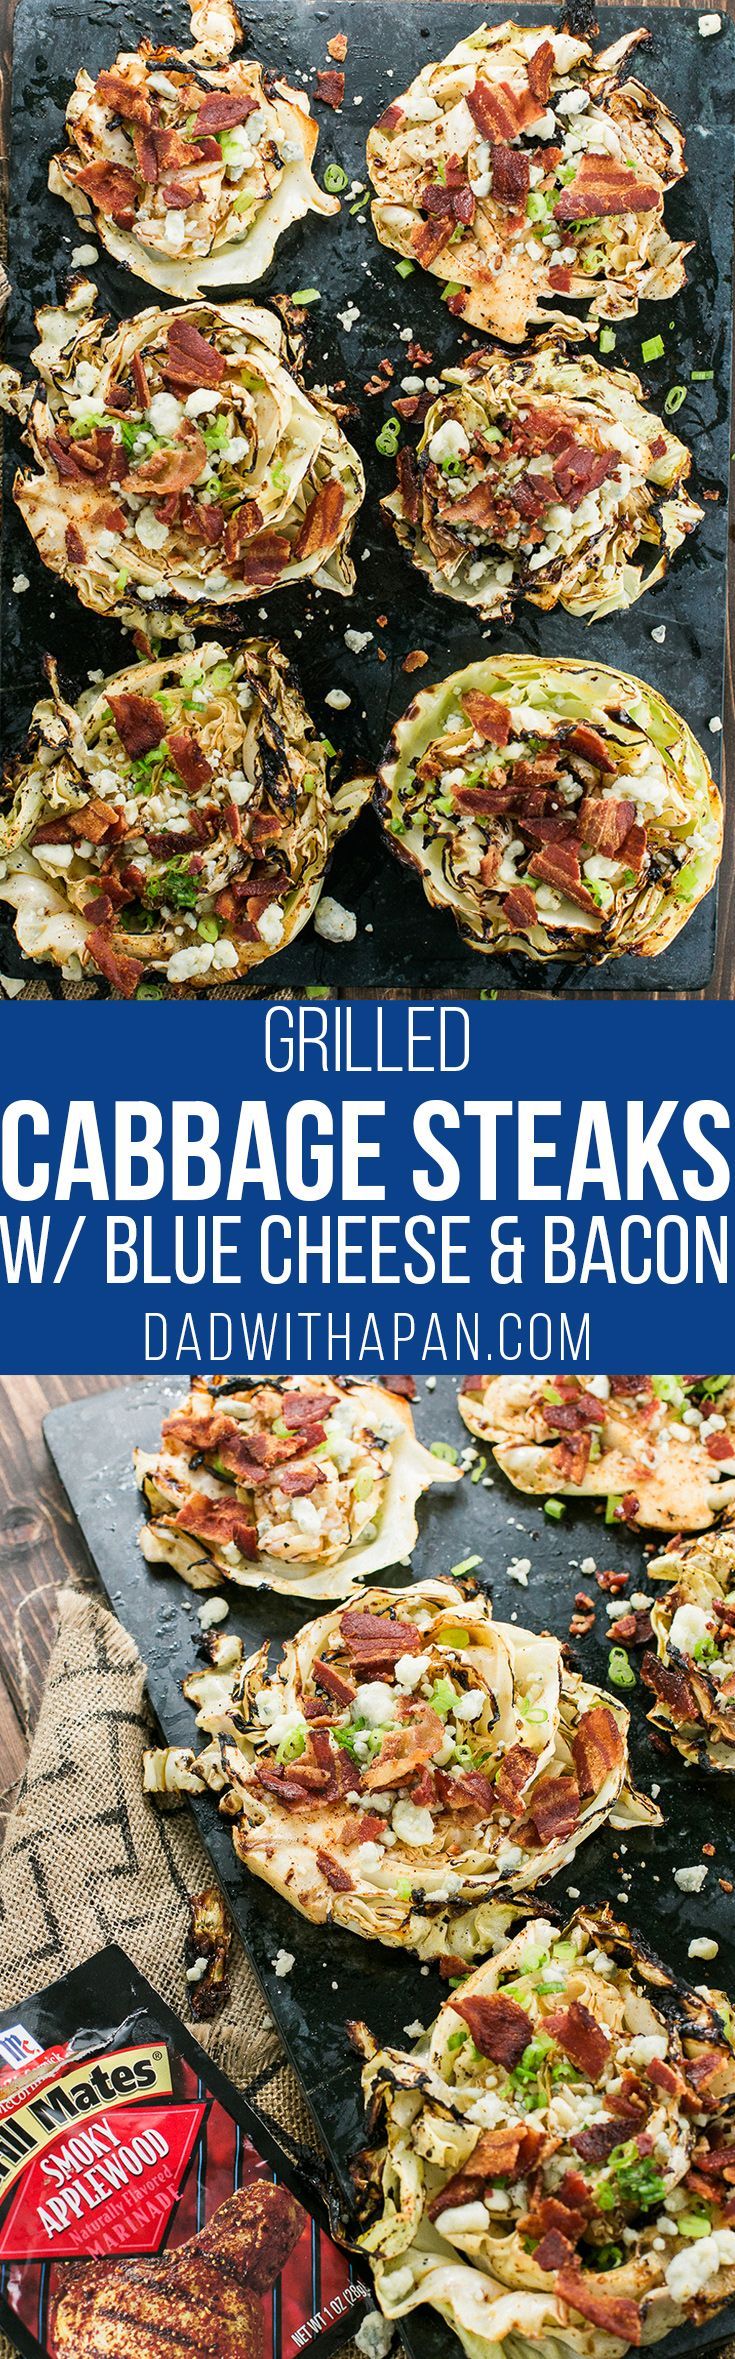 Grilled Cabbage Steaks Marinated With McCormick Grill Mates Smoky Applewood seasoning, topped with Bacon, Blue Cheese, and Green